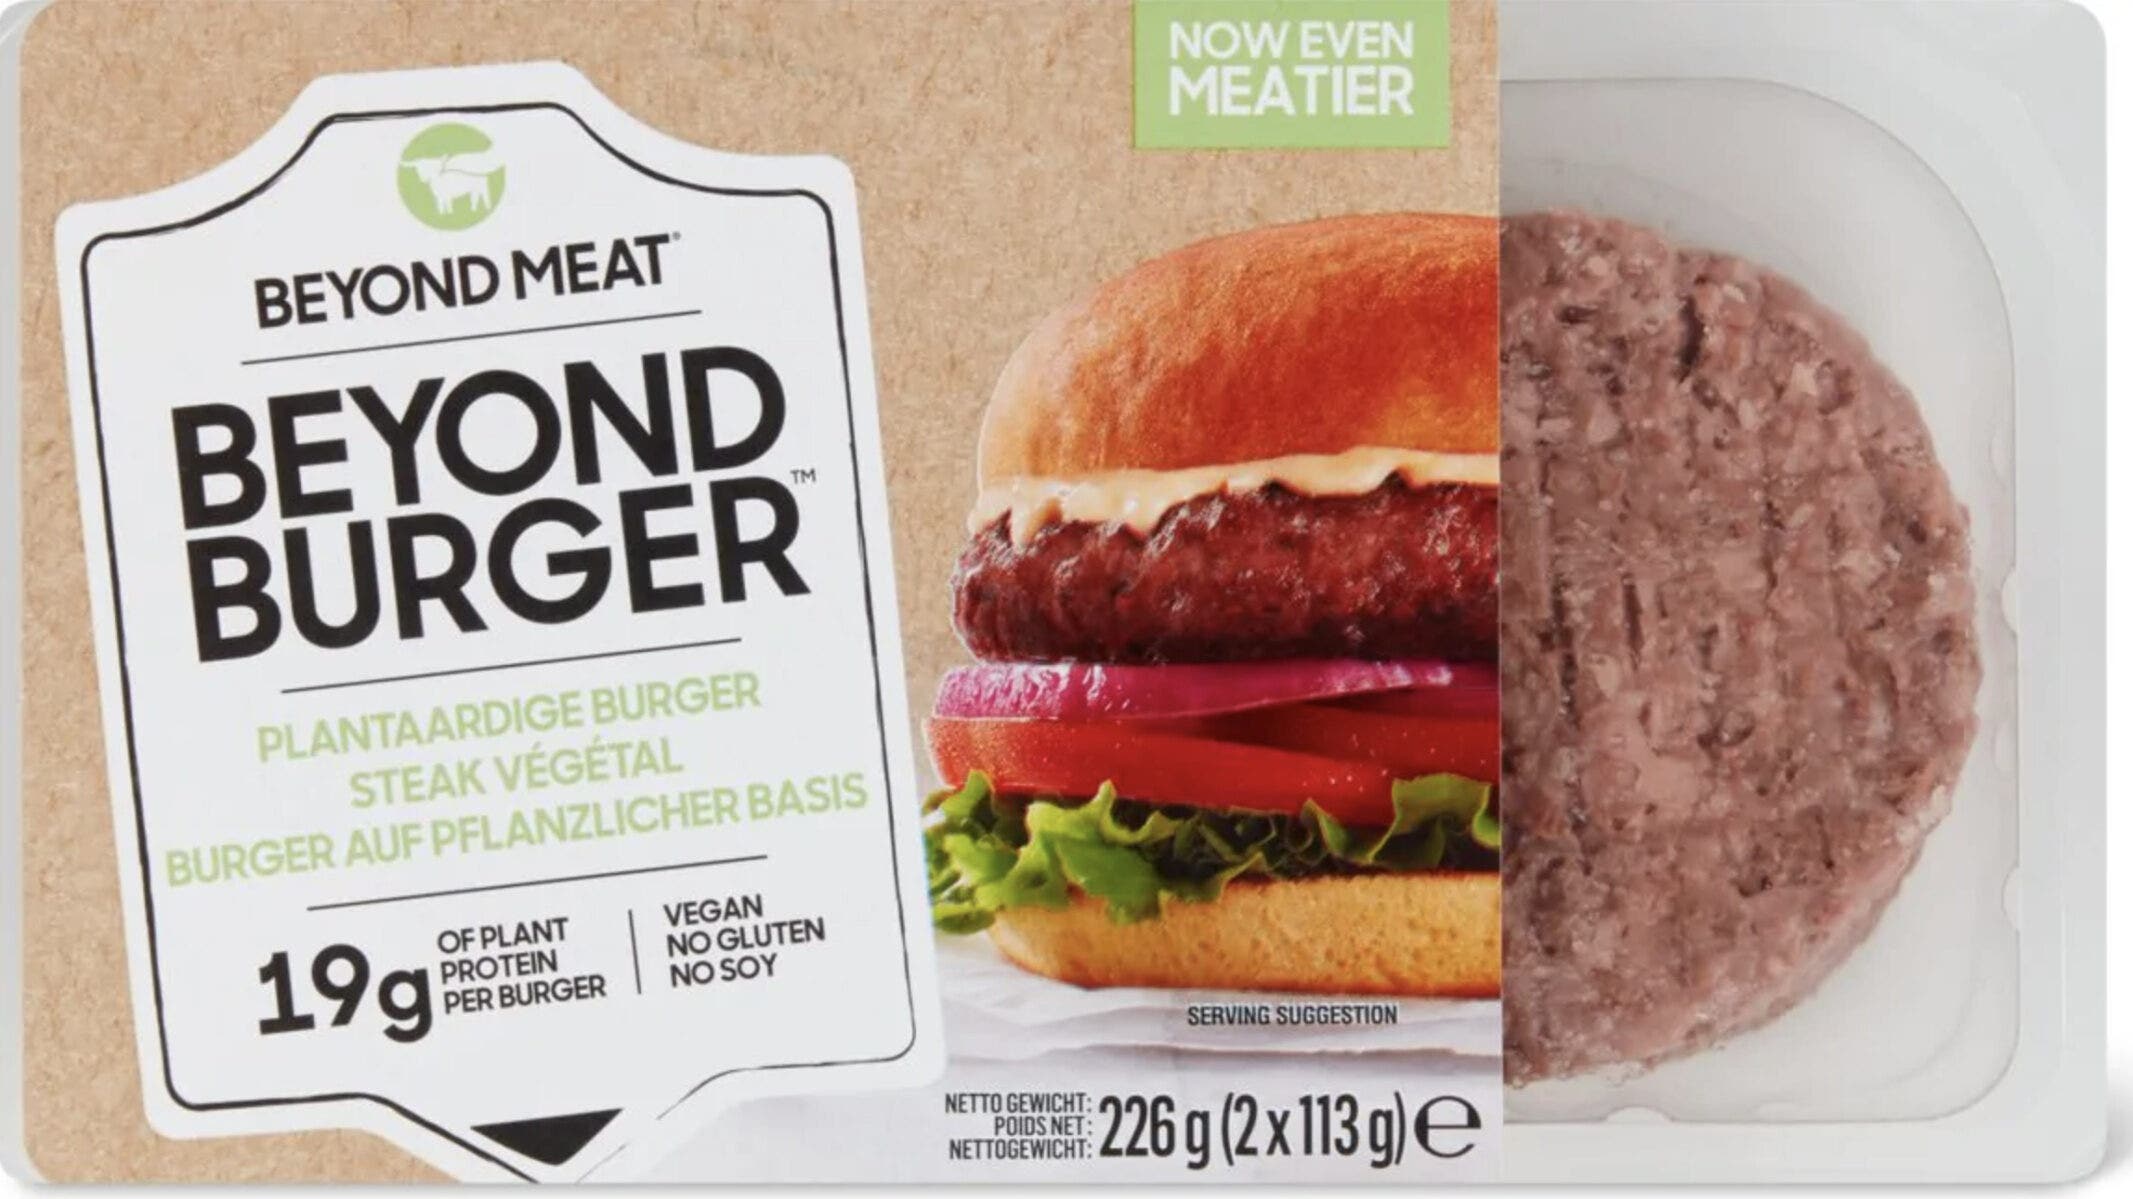 Vegan-Friendly Beyond Meat's COO Arrested For Allegedly Biting Man's Nose In Parking Lot Fight